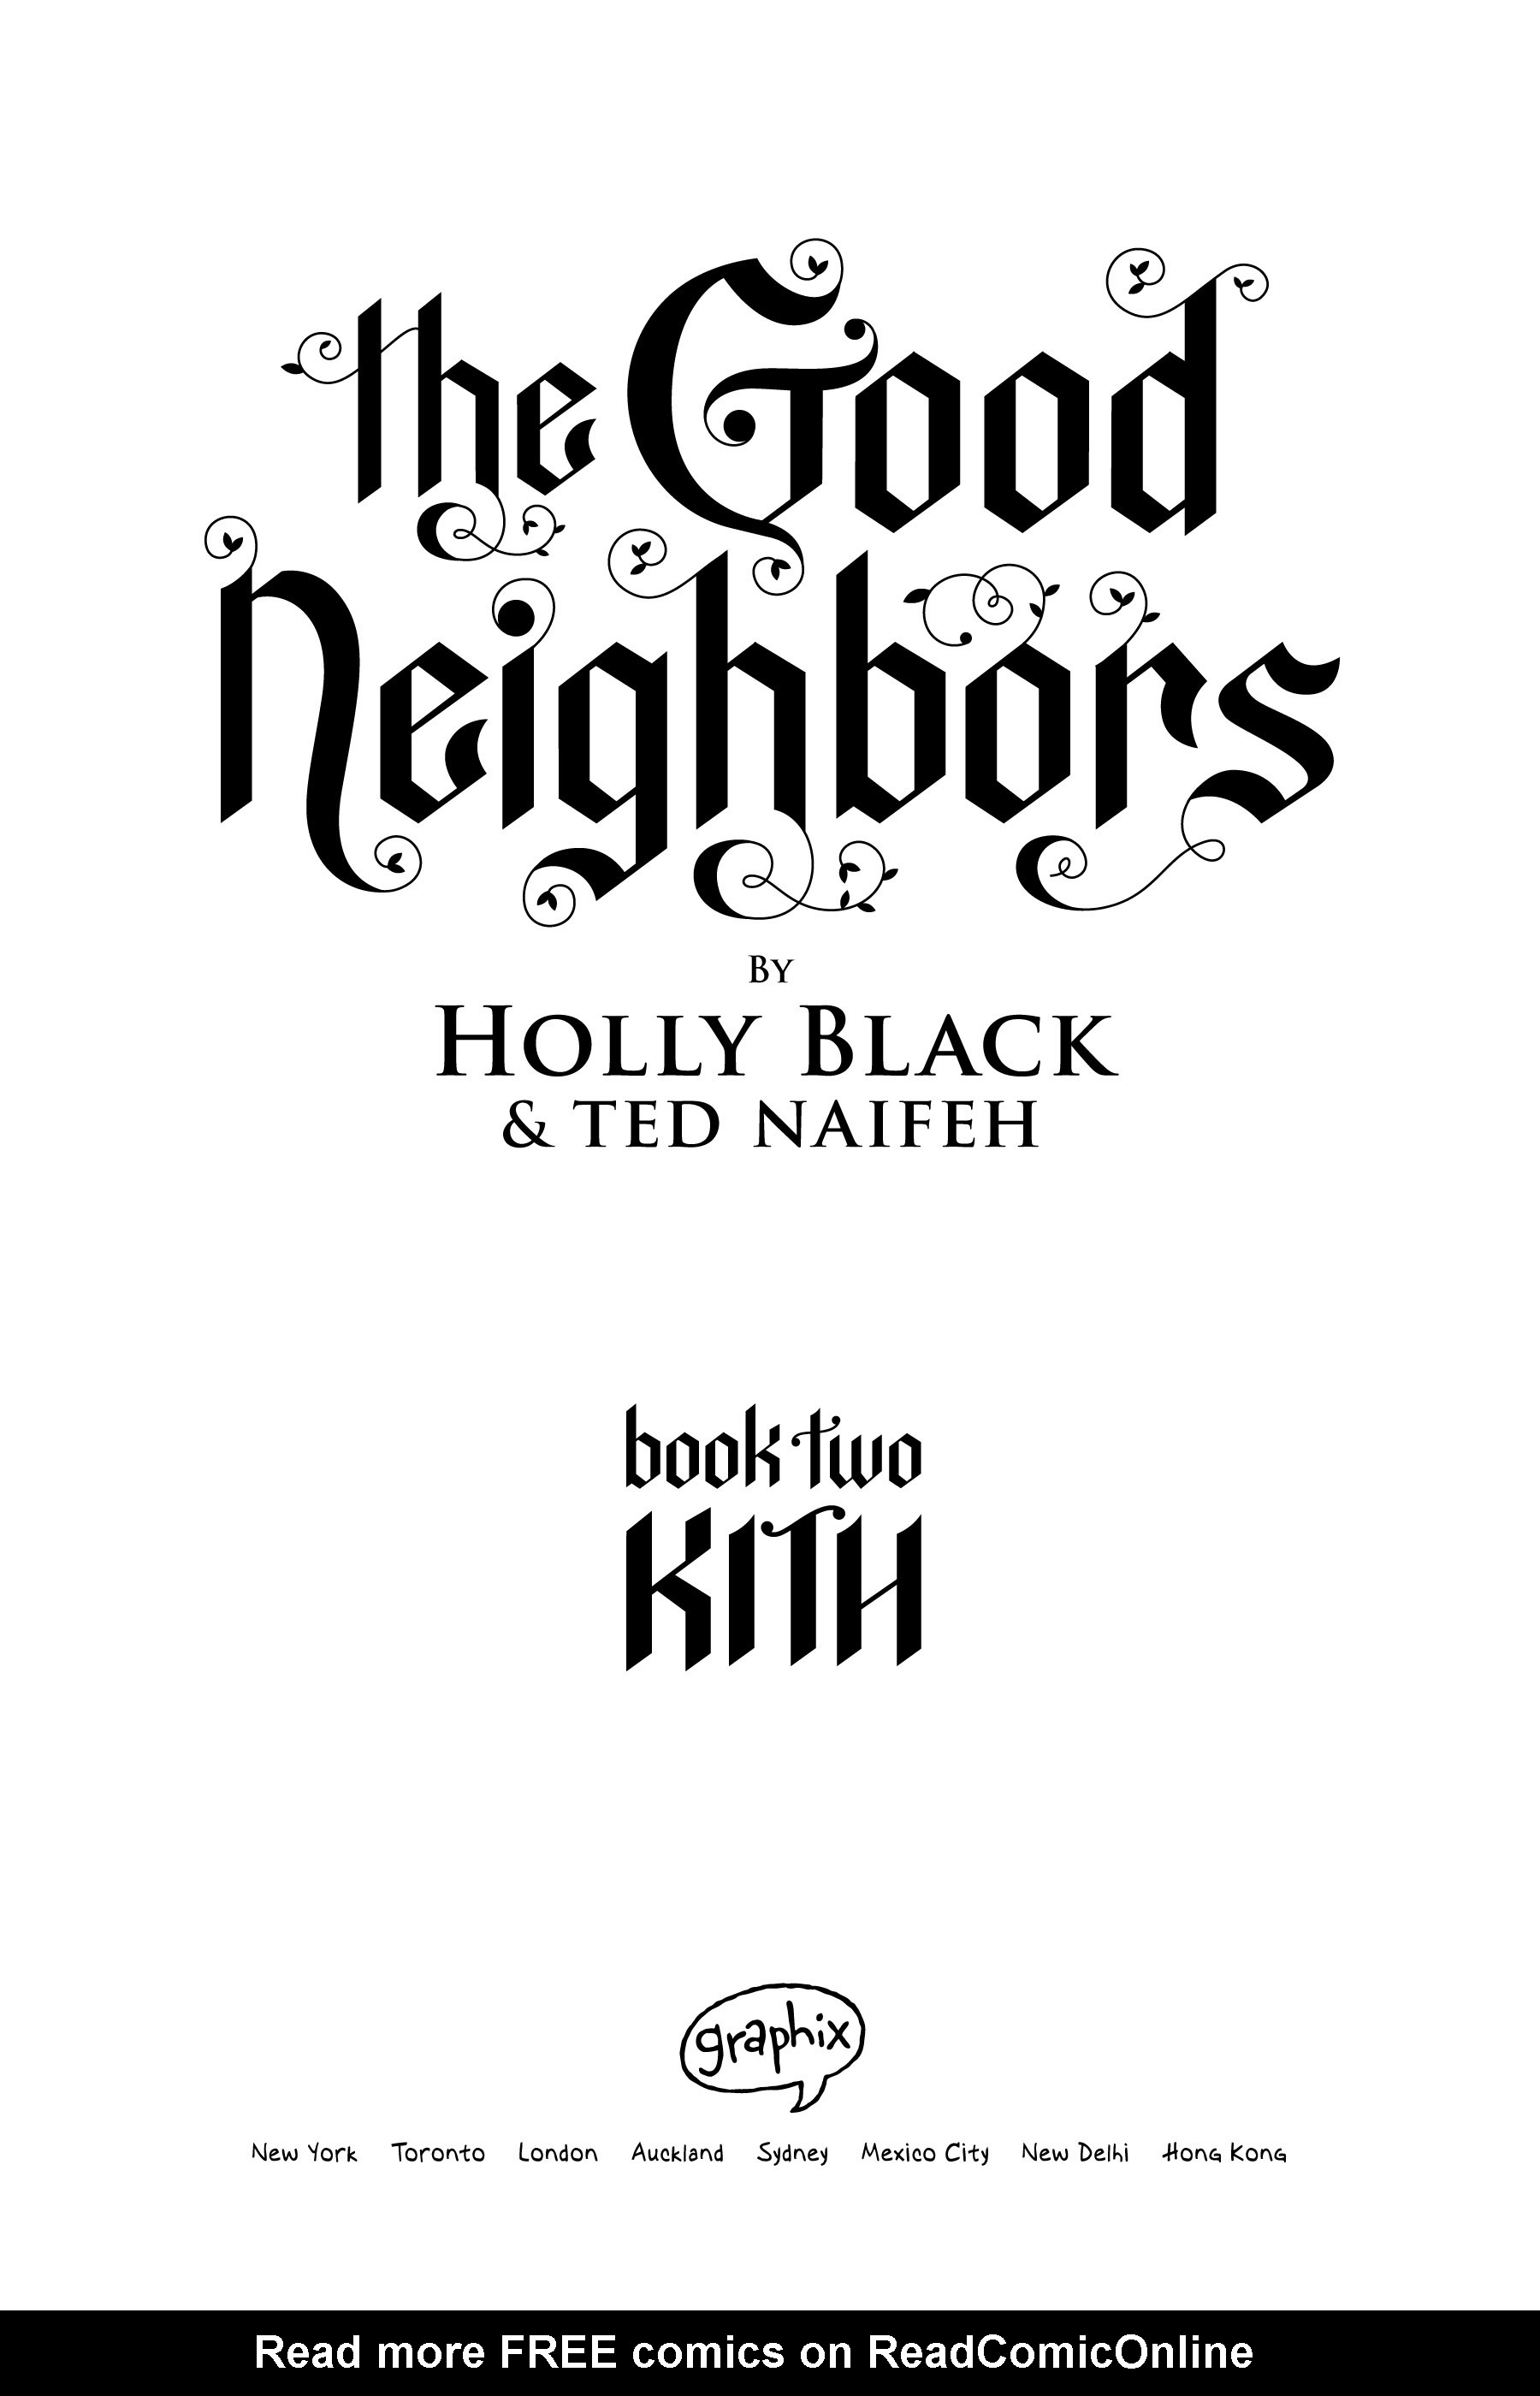 Read online The Good Neighbors comic -  Issue # TPB 2 - 5